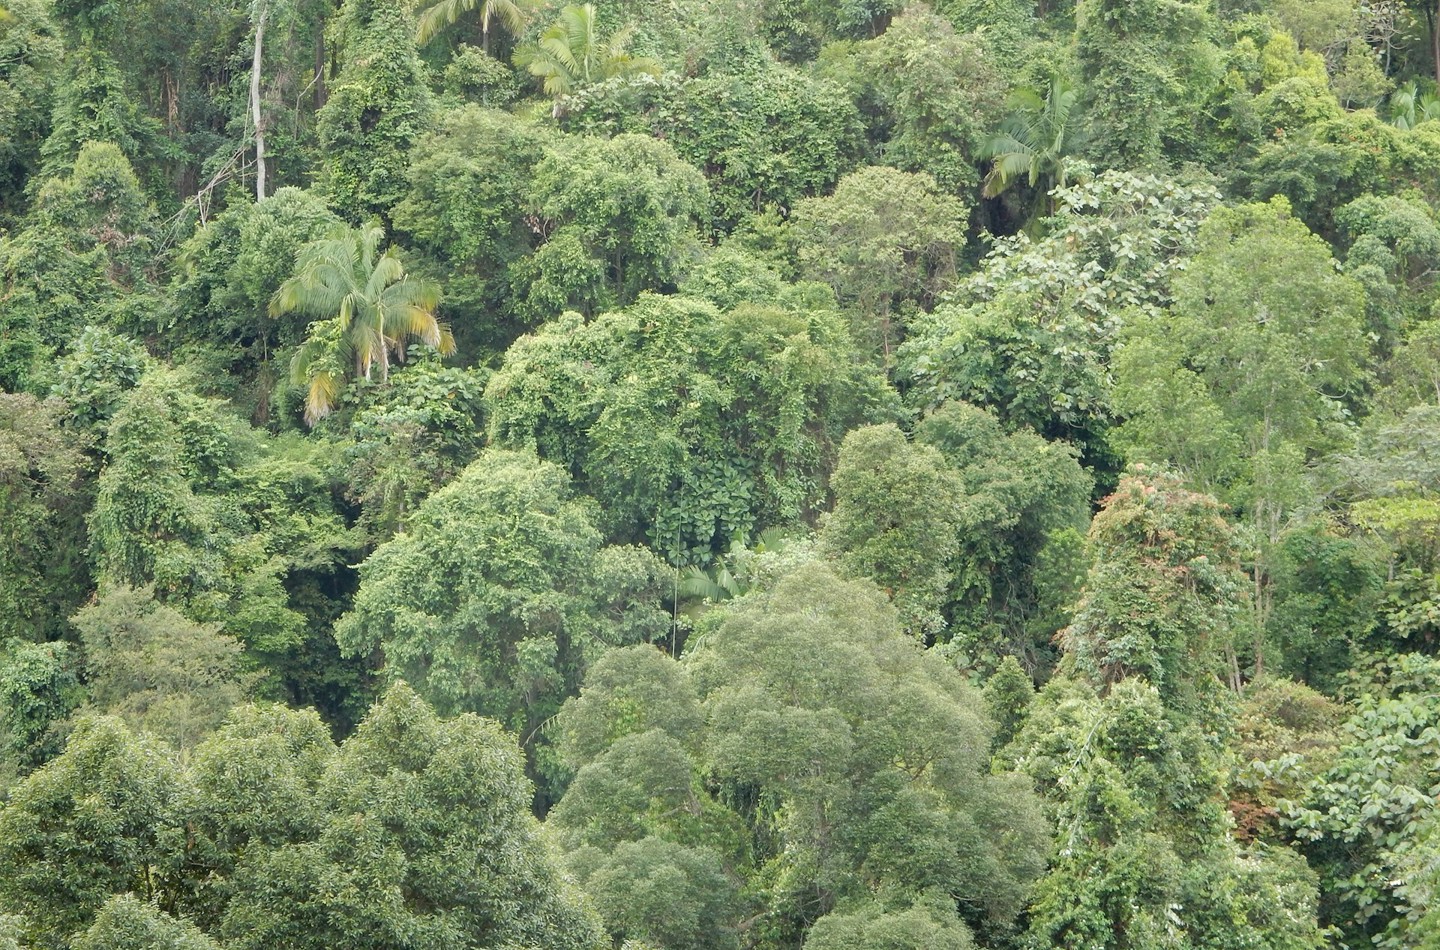 Sumatran Rainforest, showing a dense green forest canopy from above